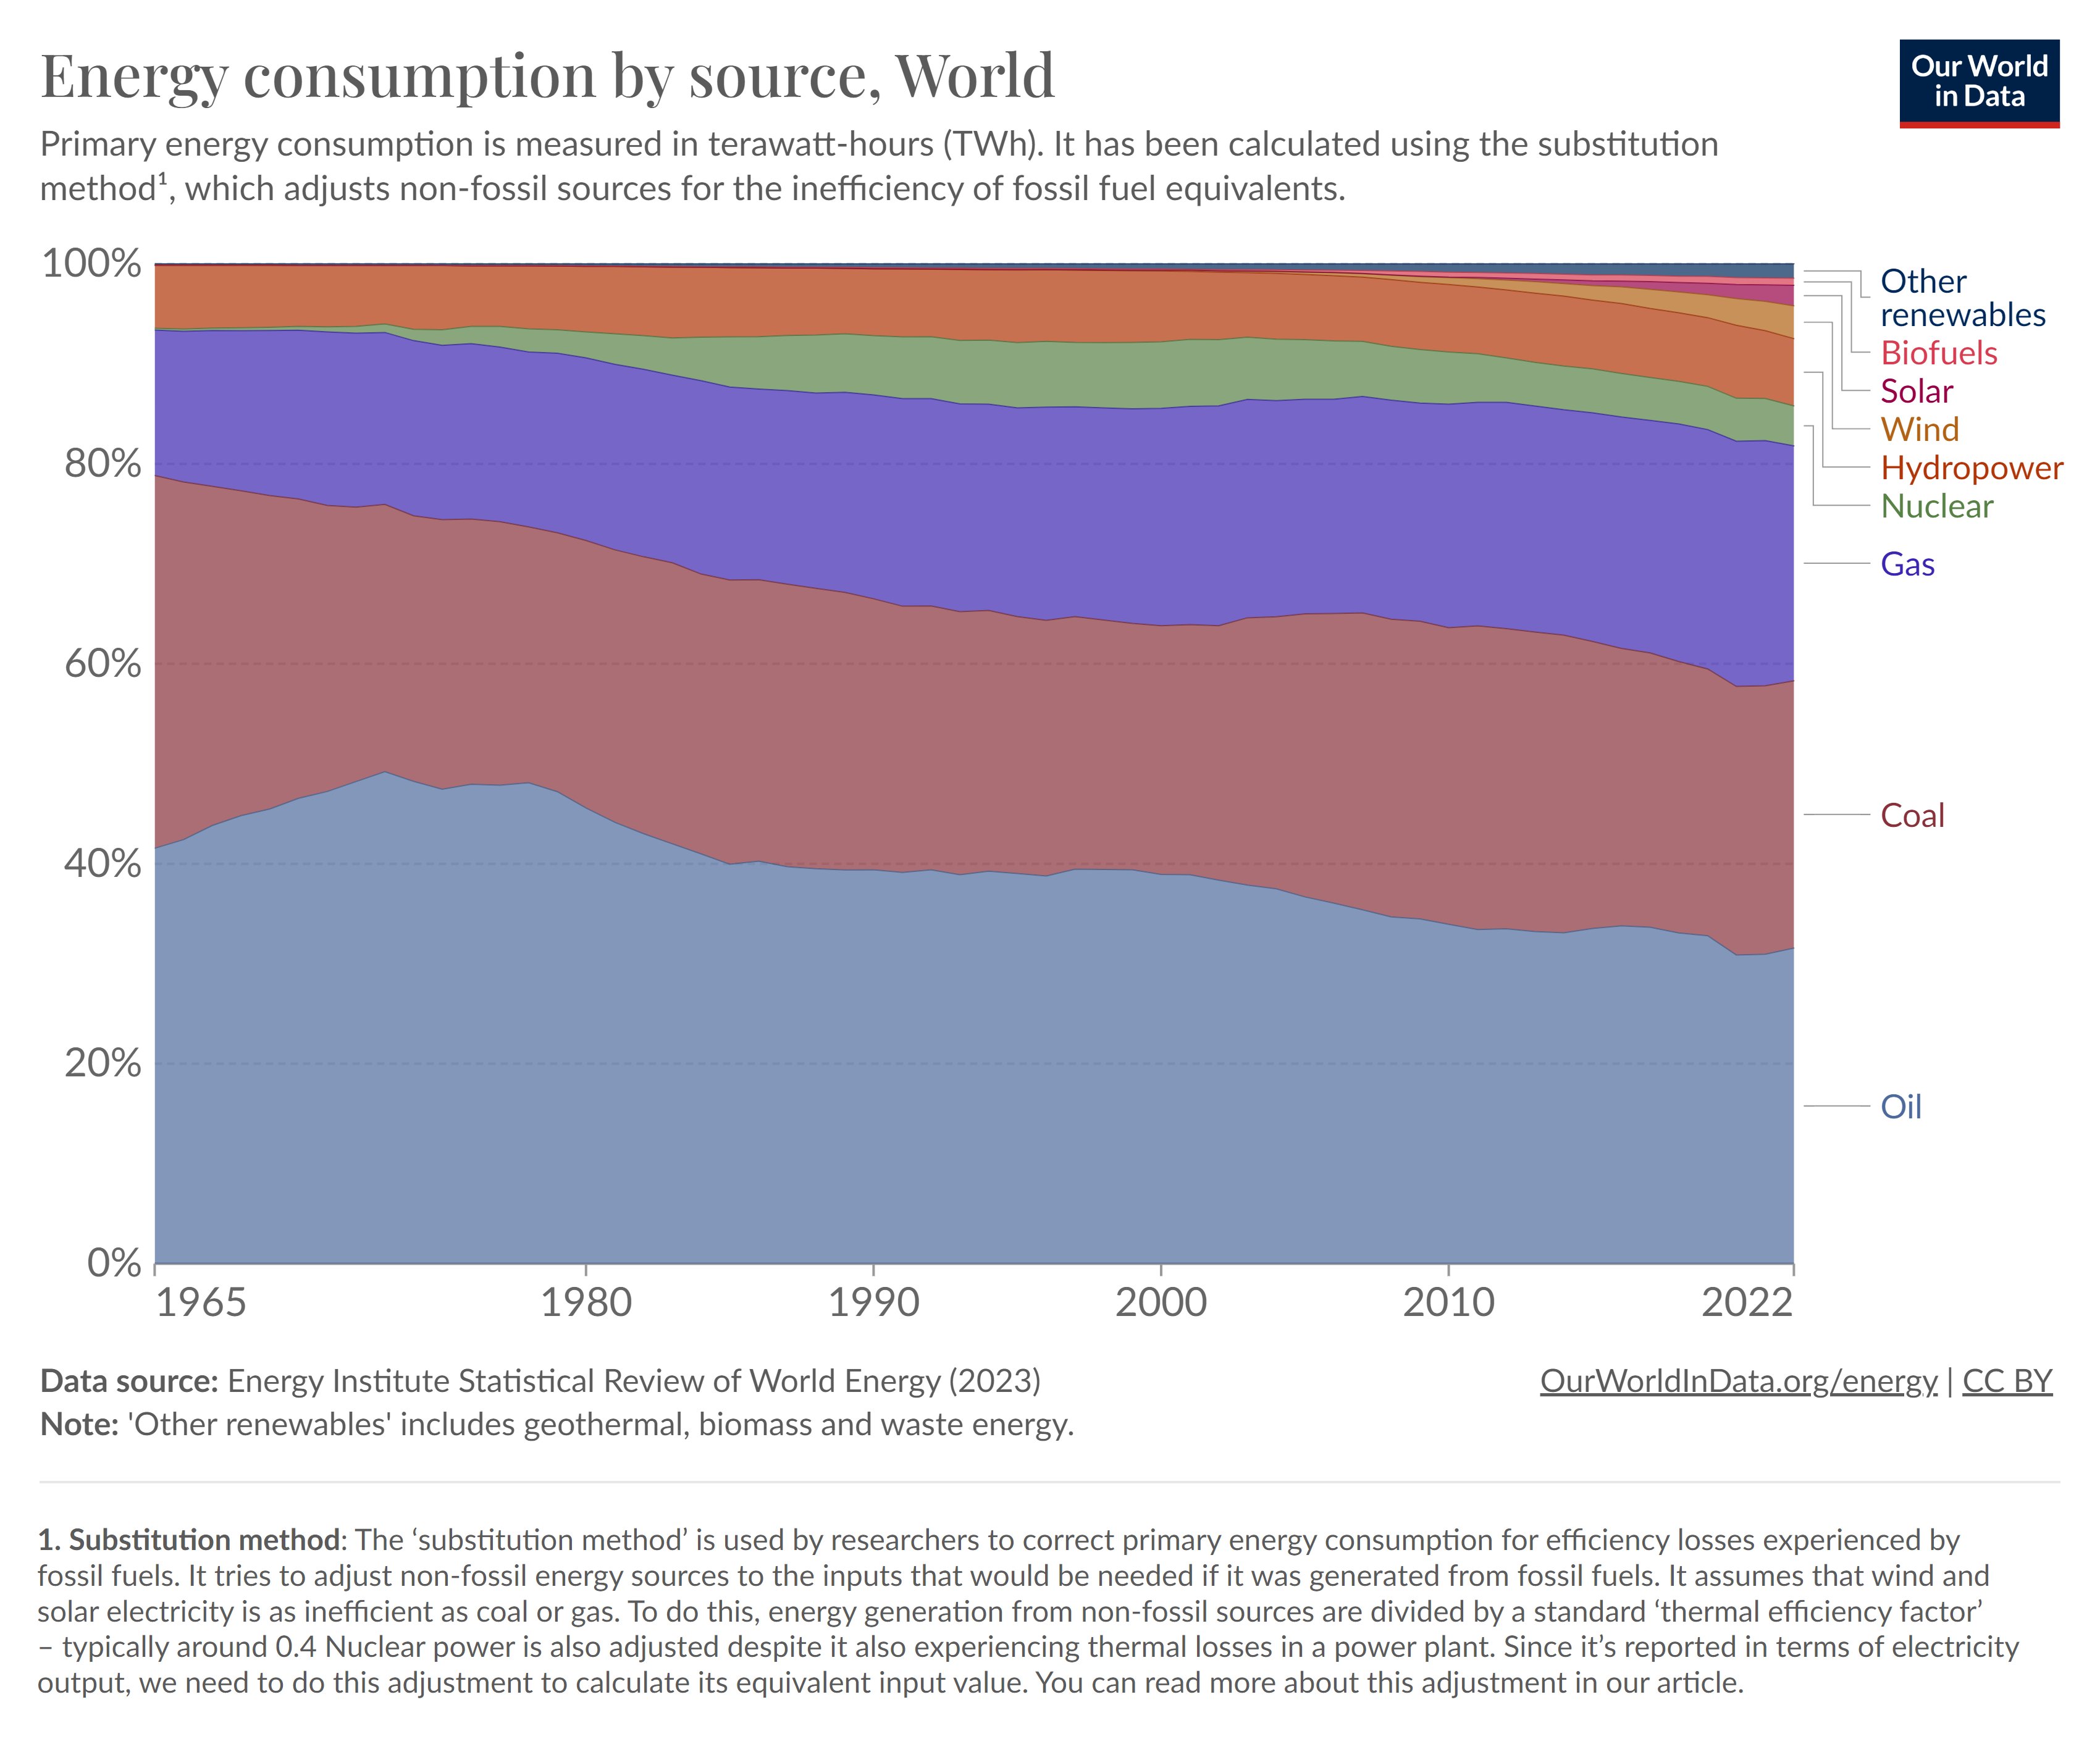 World Energy Consumption chart of different types of energy